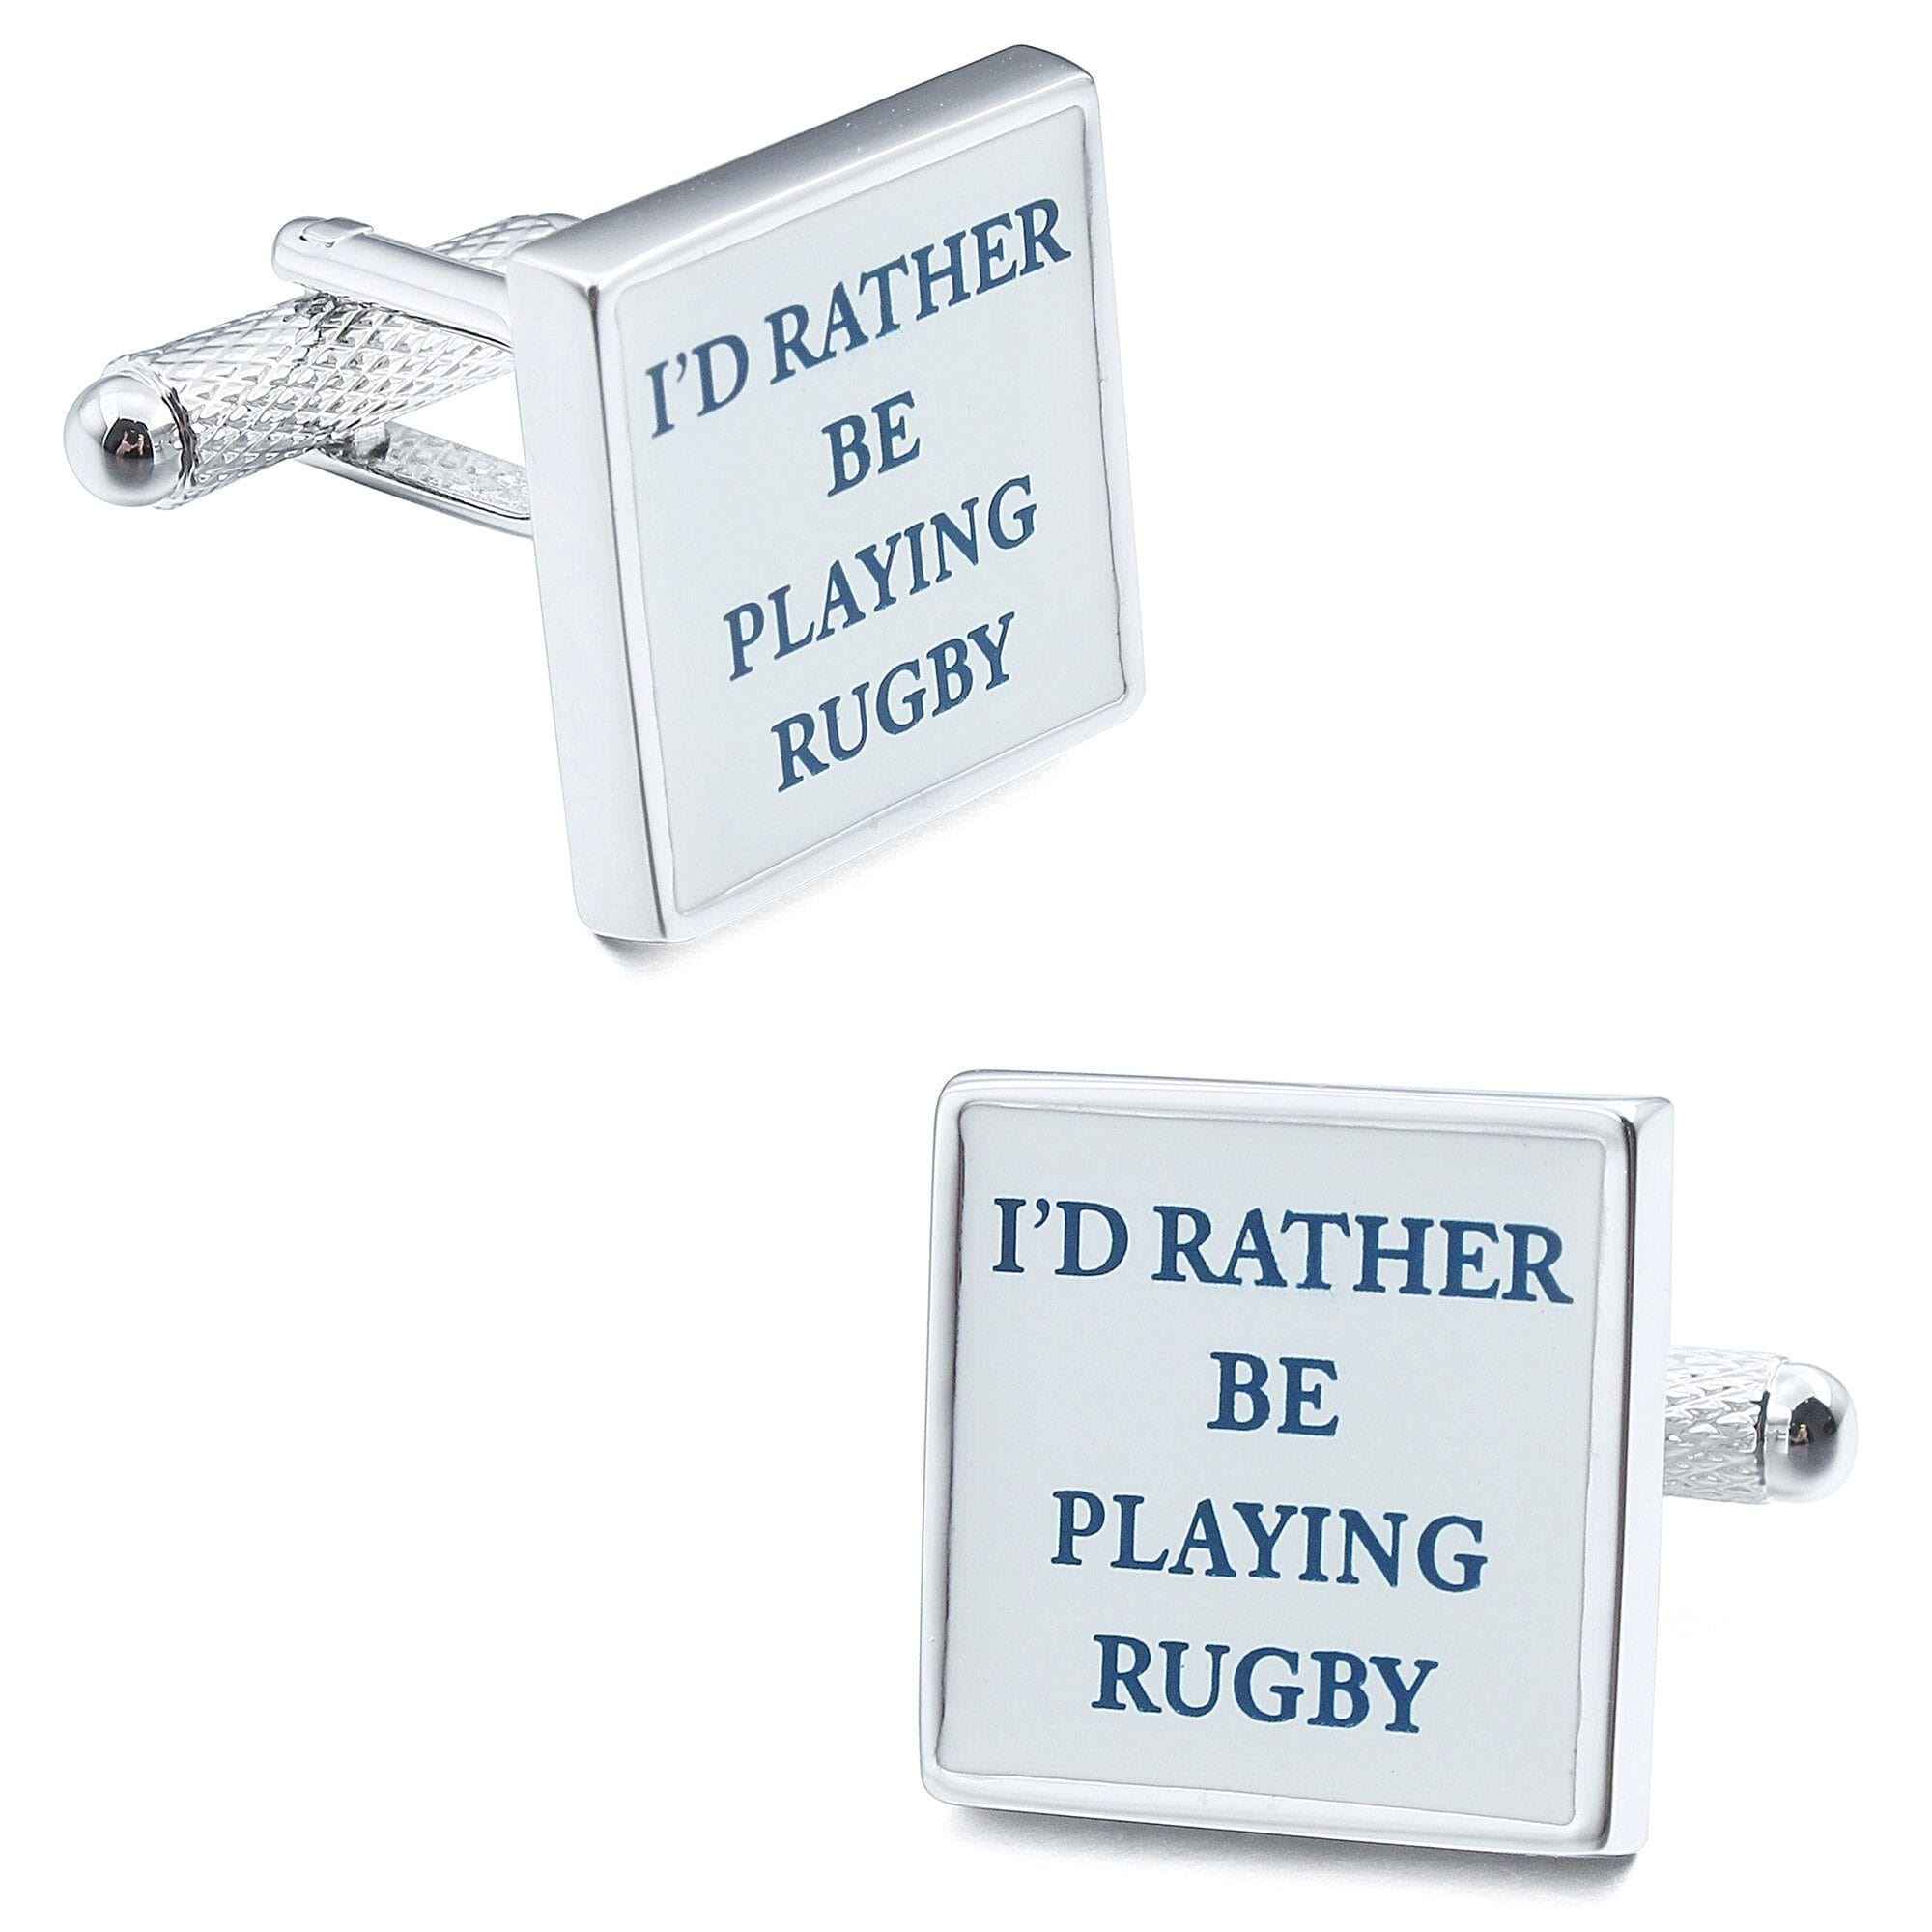 I'd rather be Playing Rugby Cufflinks Novelty Cufflinks Clinks Australia I'd rather be Playing Rugby Cufflinks 